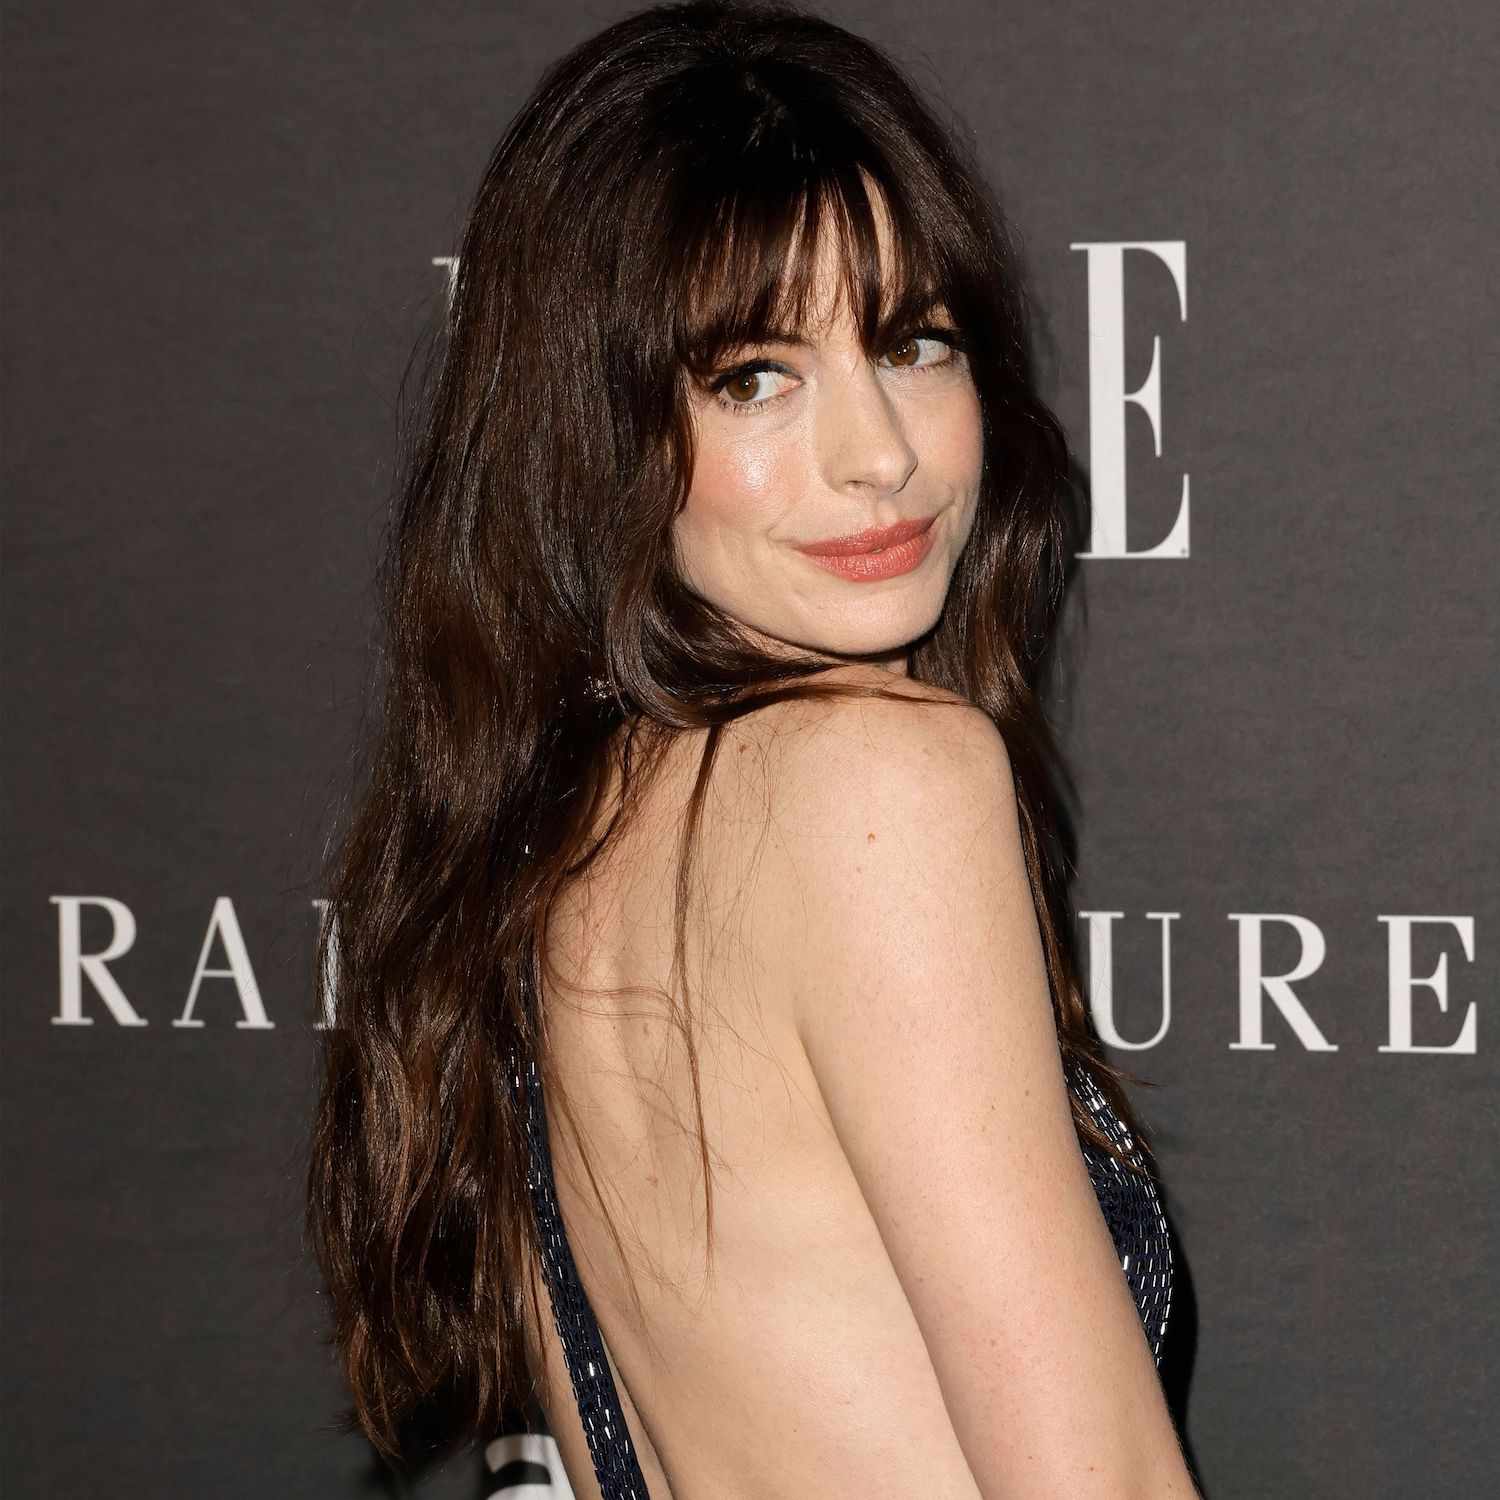 Anne Hathaway wears a long, wavy hairstyle with wispy bangs